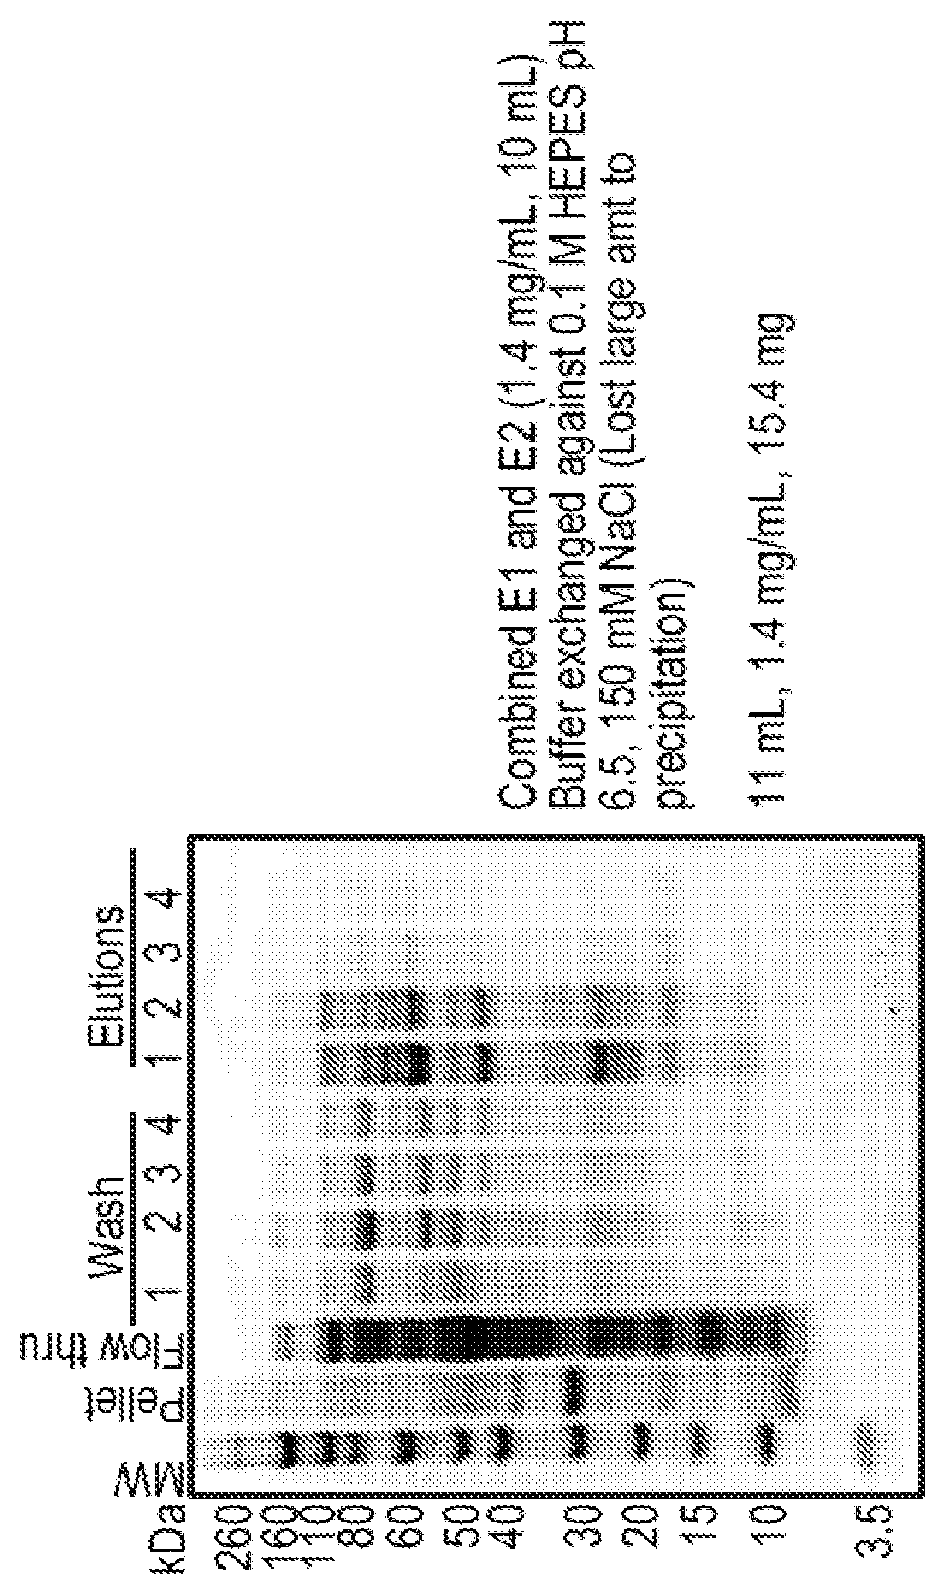 Charge-engineered antibodies or compositions of penetration-enhanced targeting proteins and methods of use